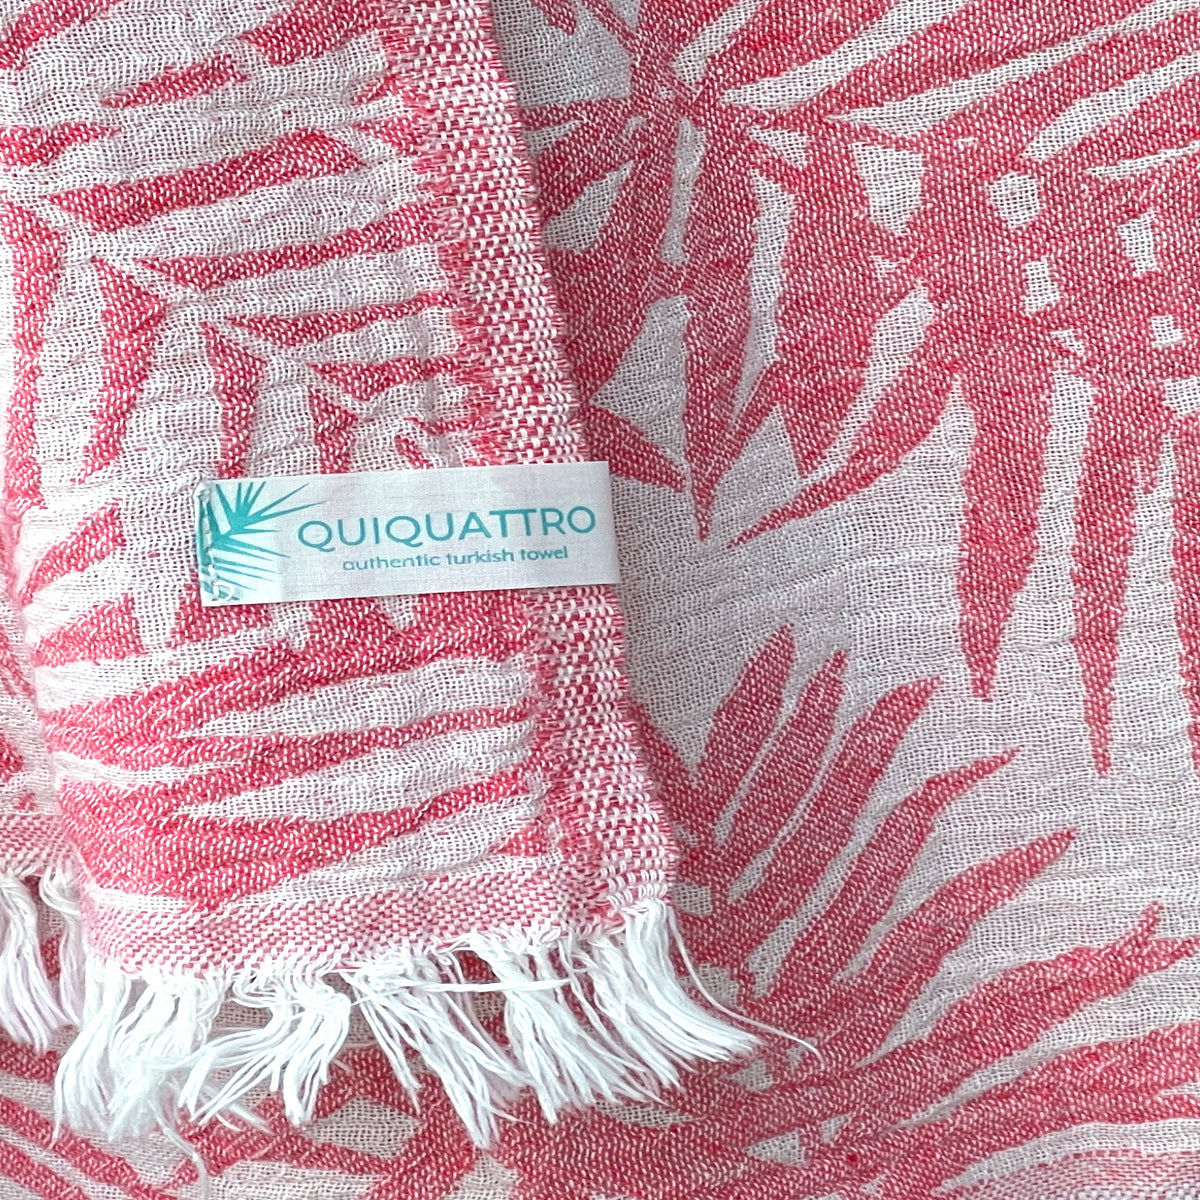 Authentic Towels – Quiquattro for QuiQuattro bath more from Turkish beach, and